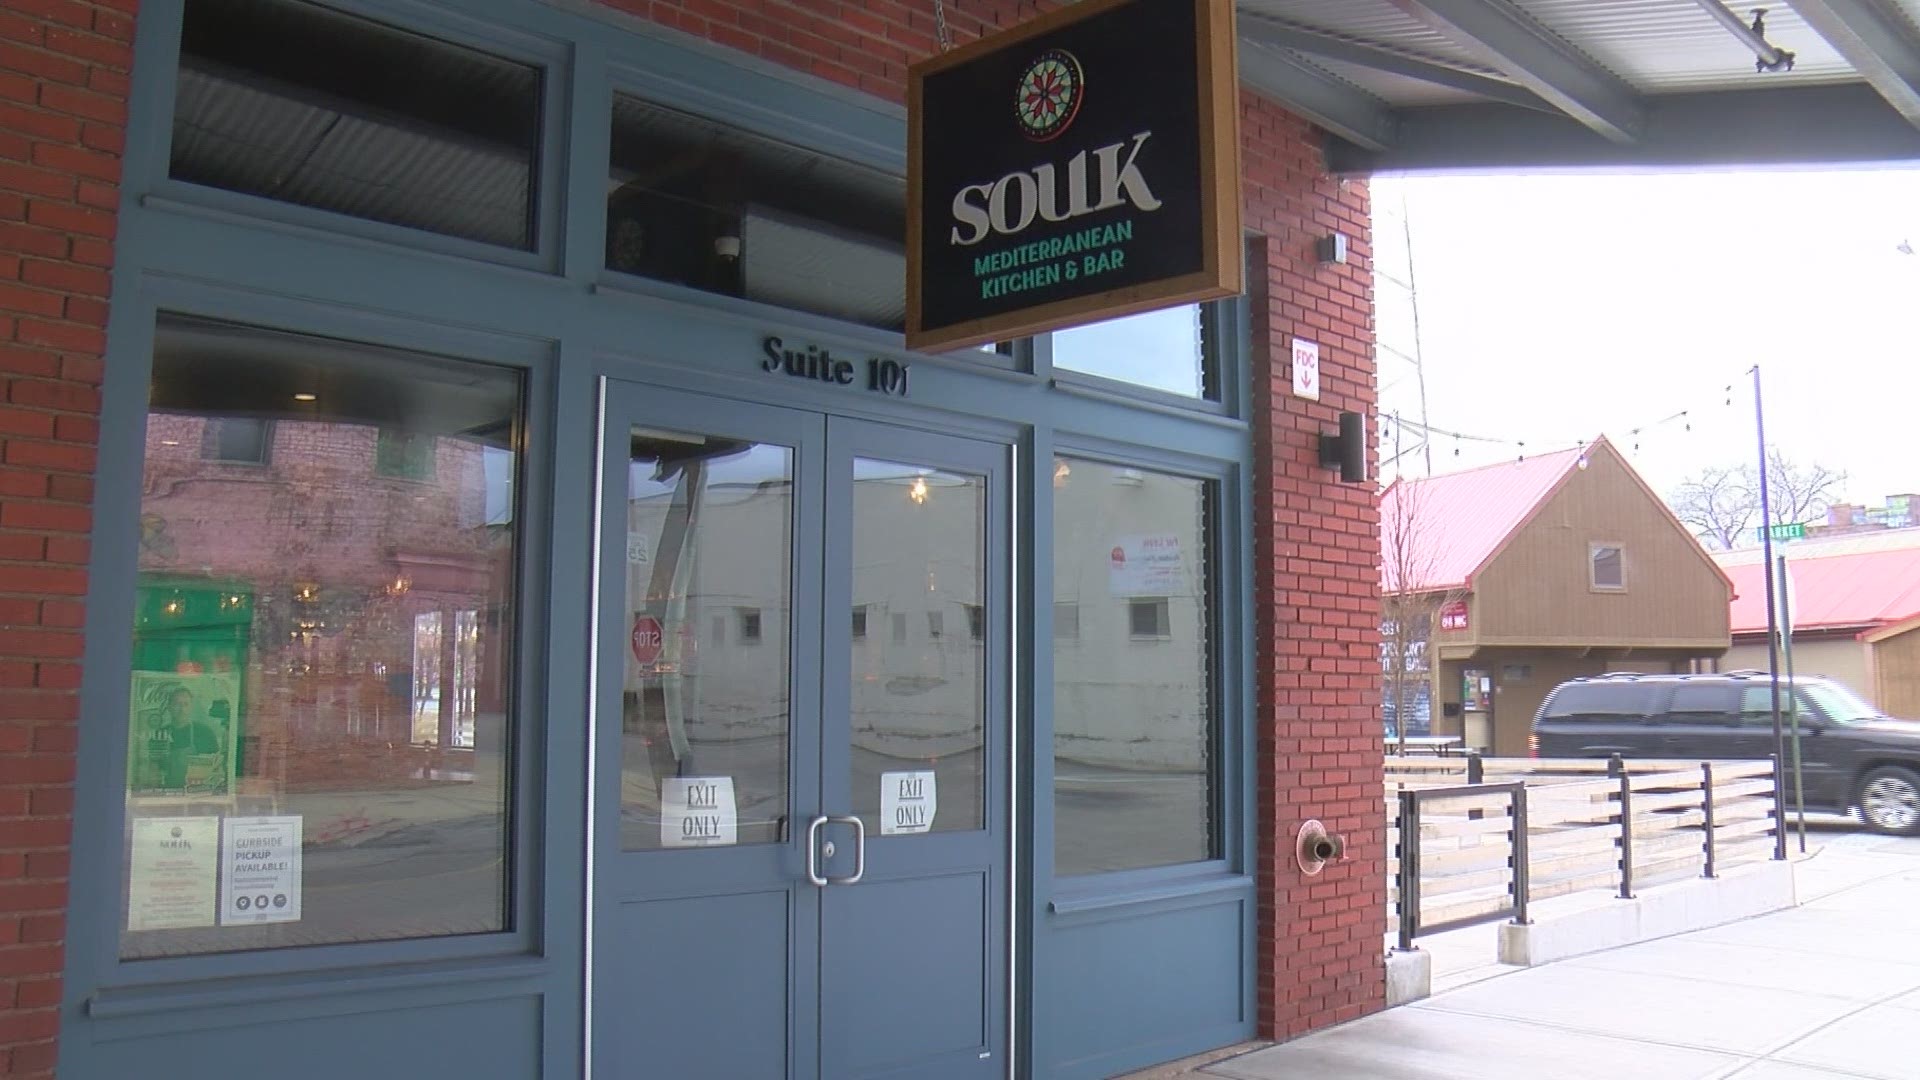 In a Facebook post, Souk Mediterranean Kitchen said a customer named Billy left enough to give each employee $200.